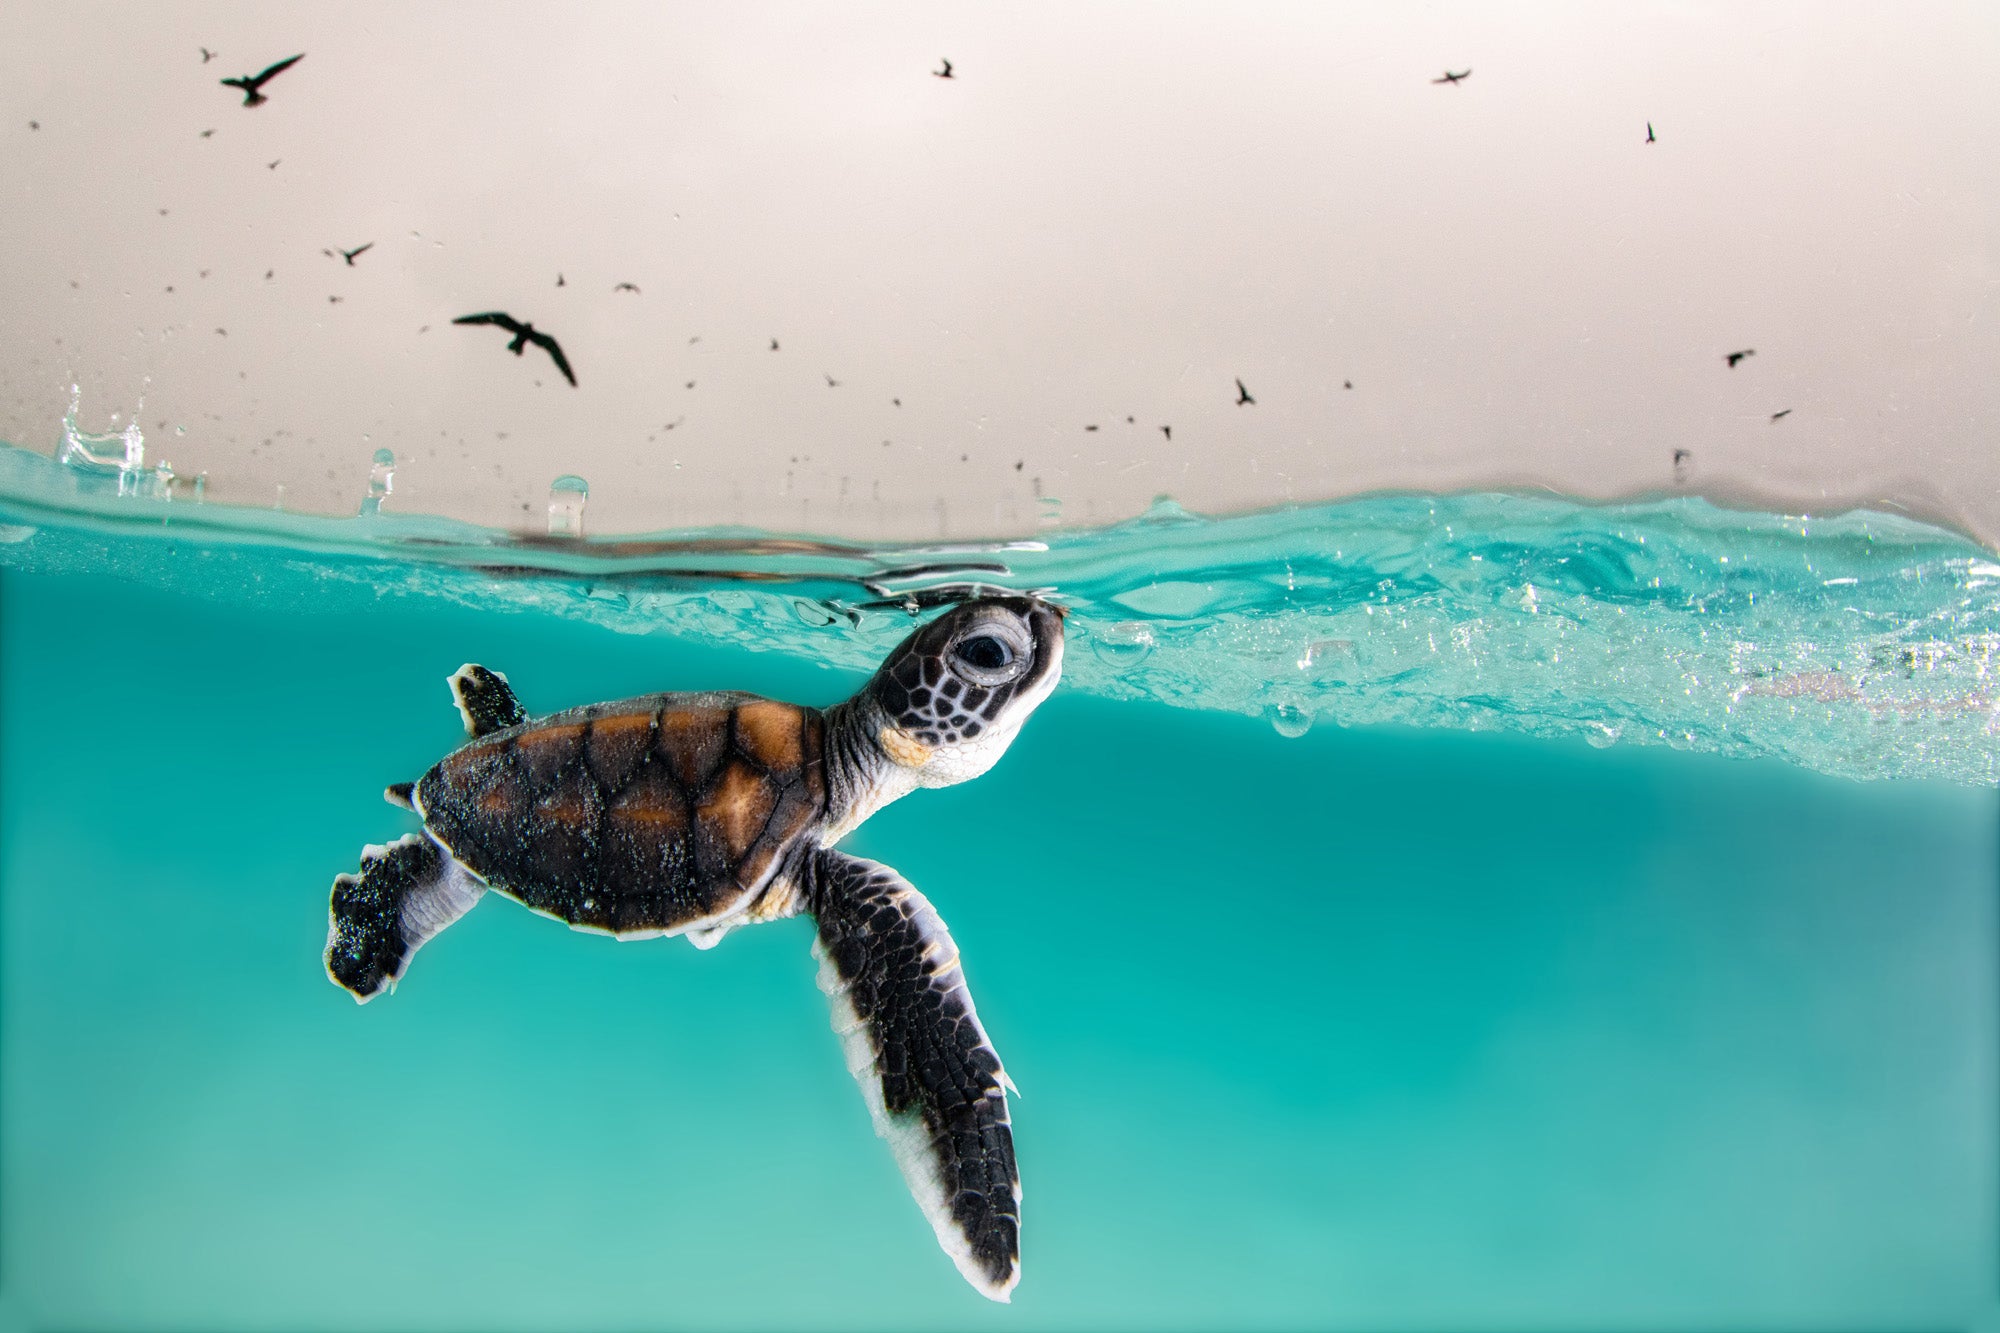 A Green Sea Turtle hatchling cautiously surfaces for air to a sky full of hungry birds.